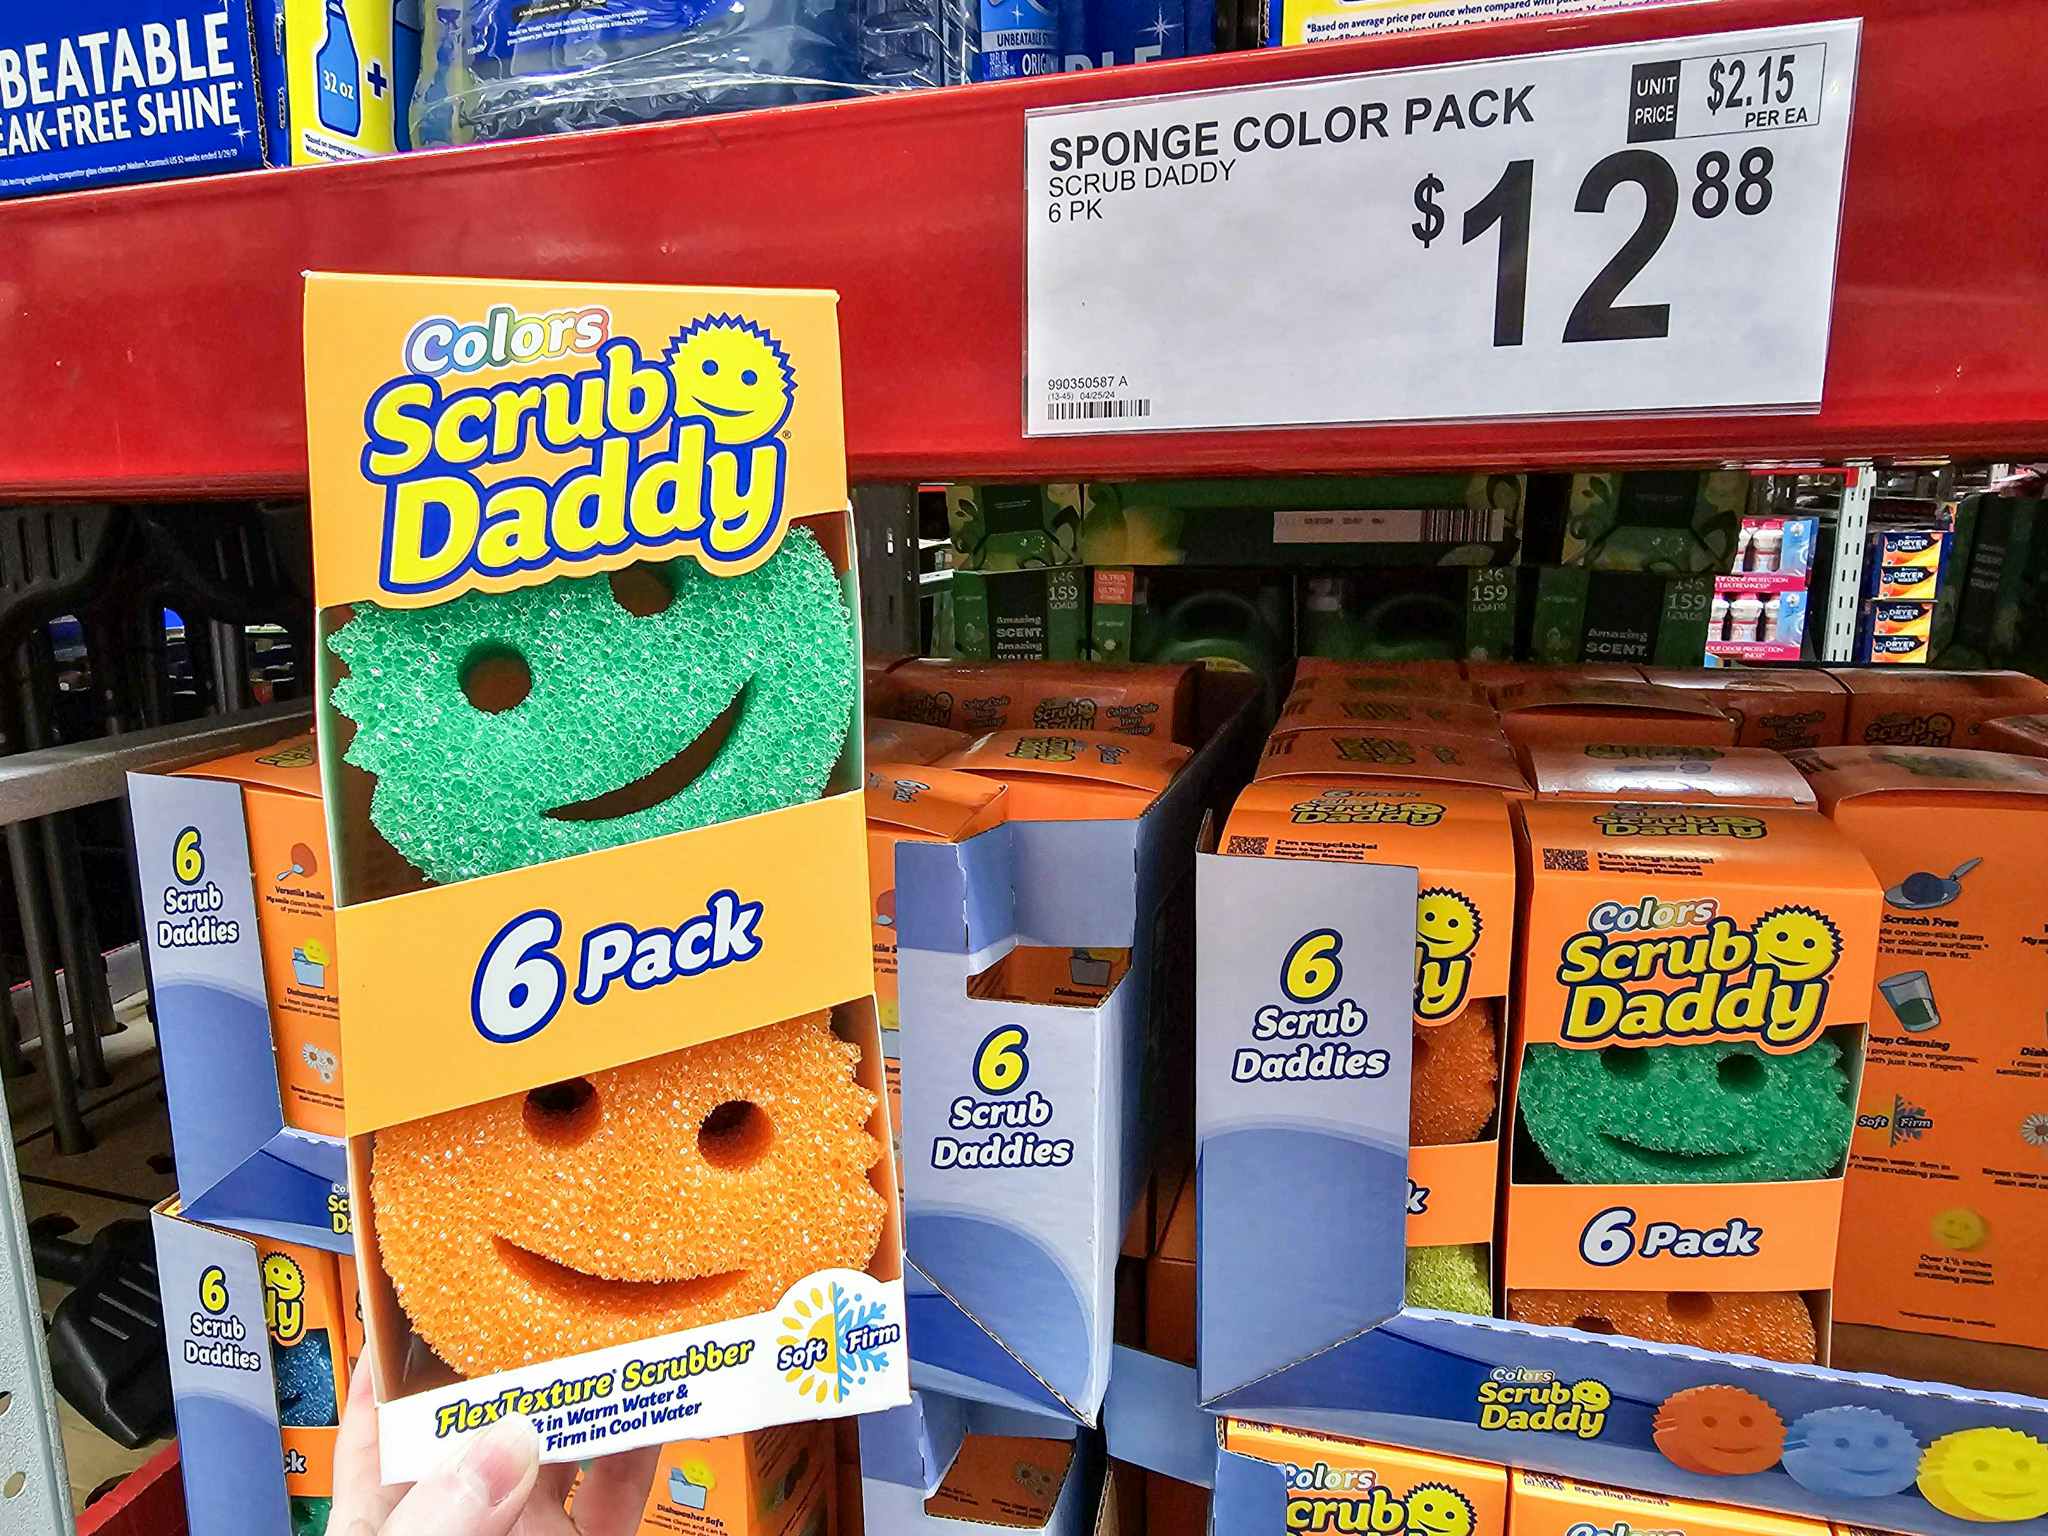 person holding a pack of scrub daddy sponges by a price tag for $12.98